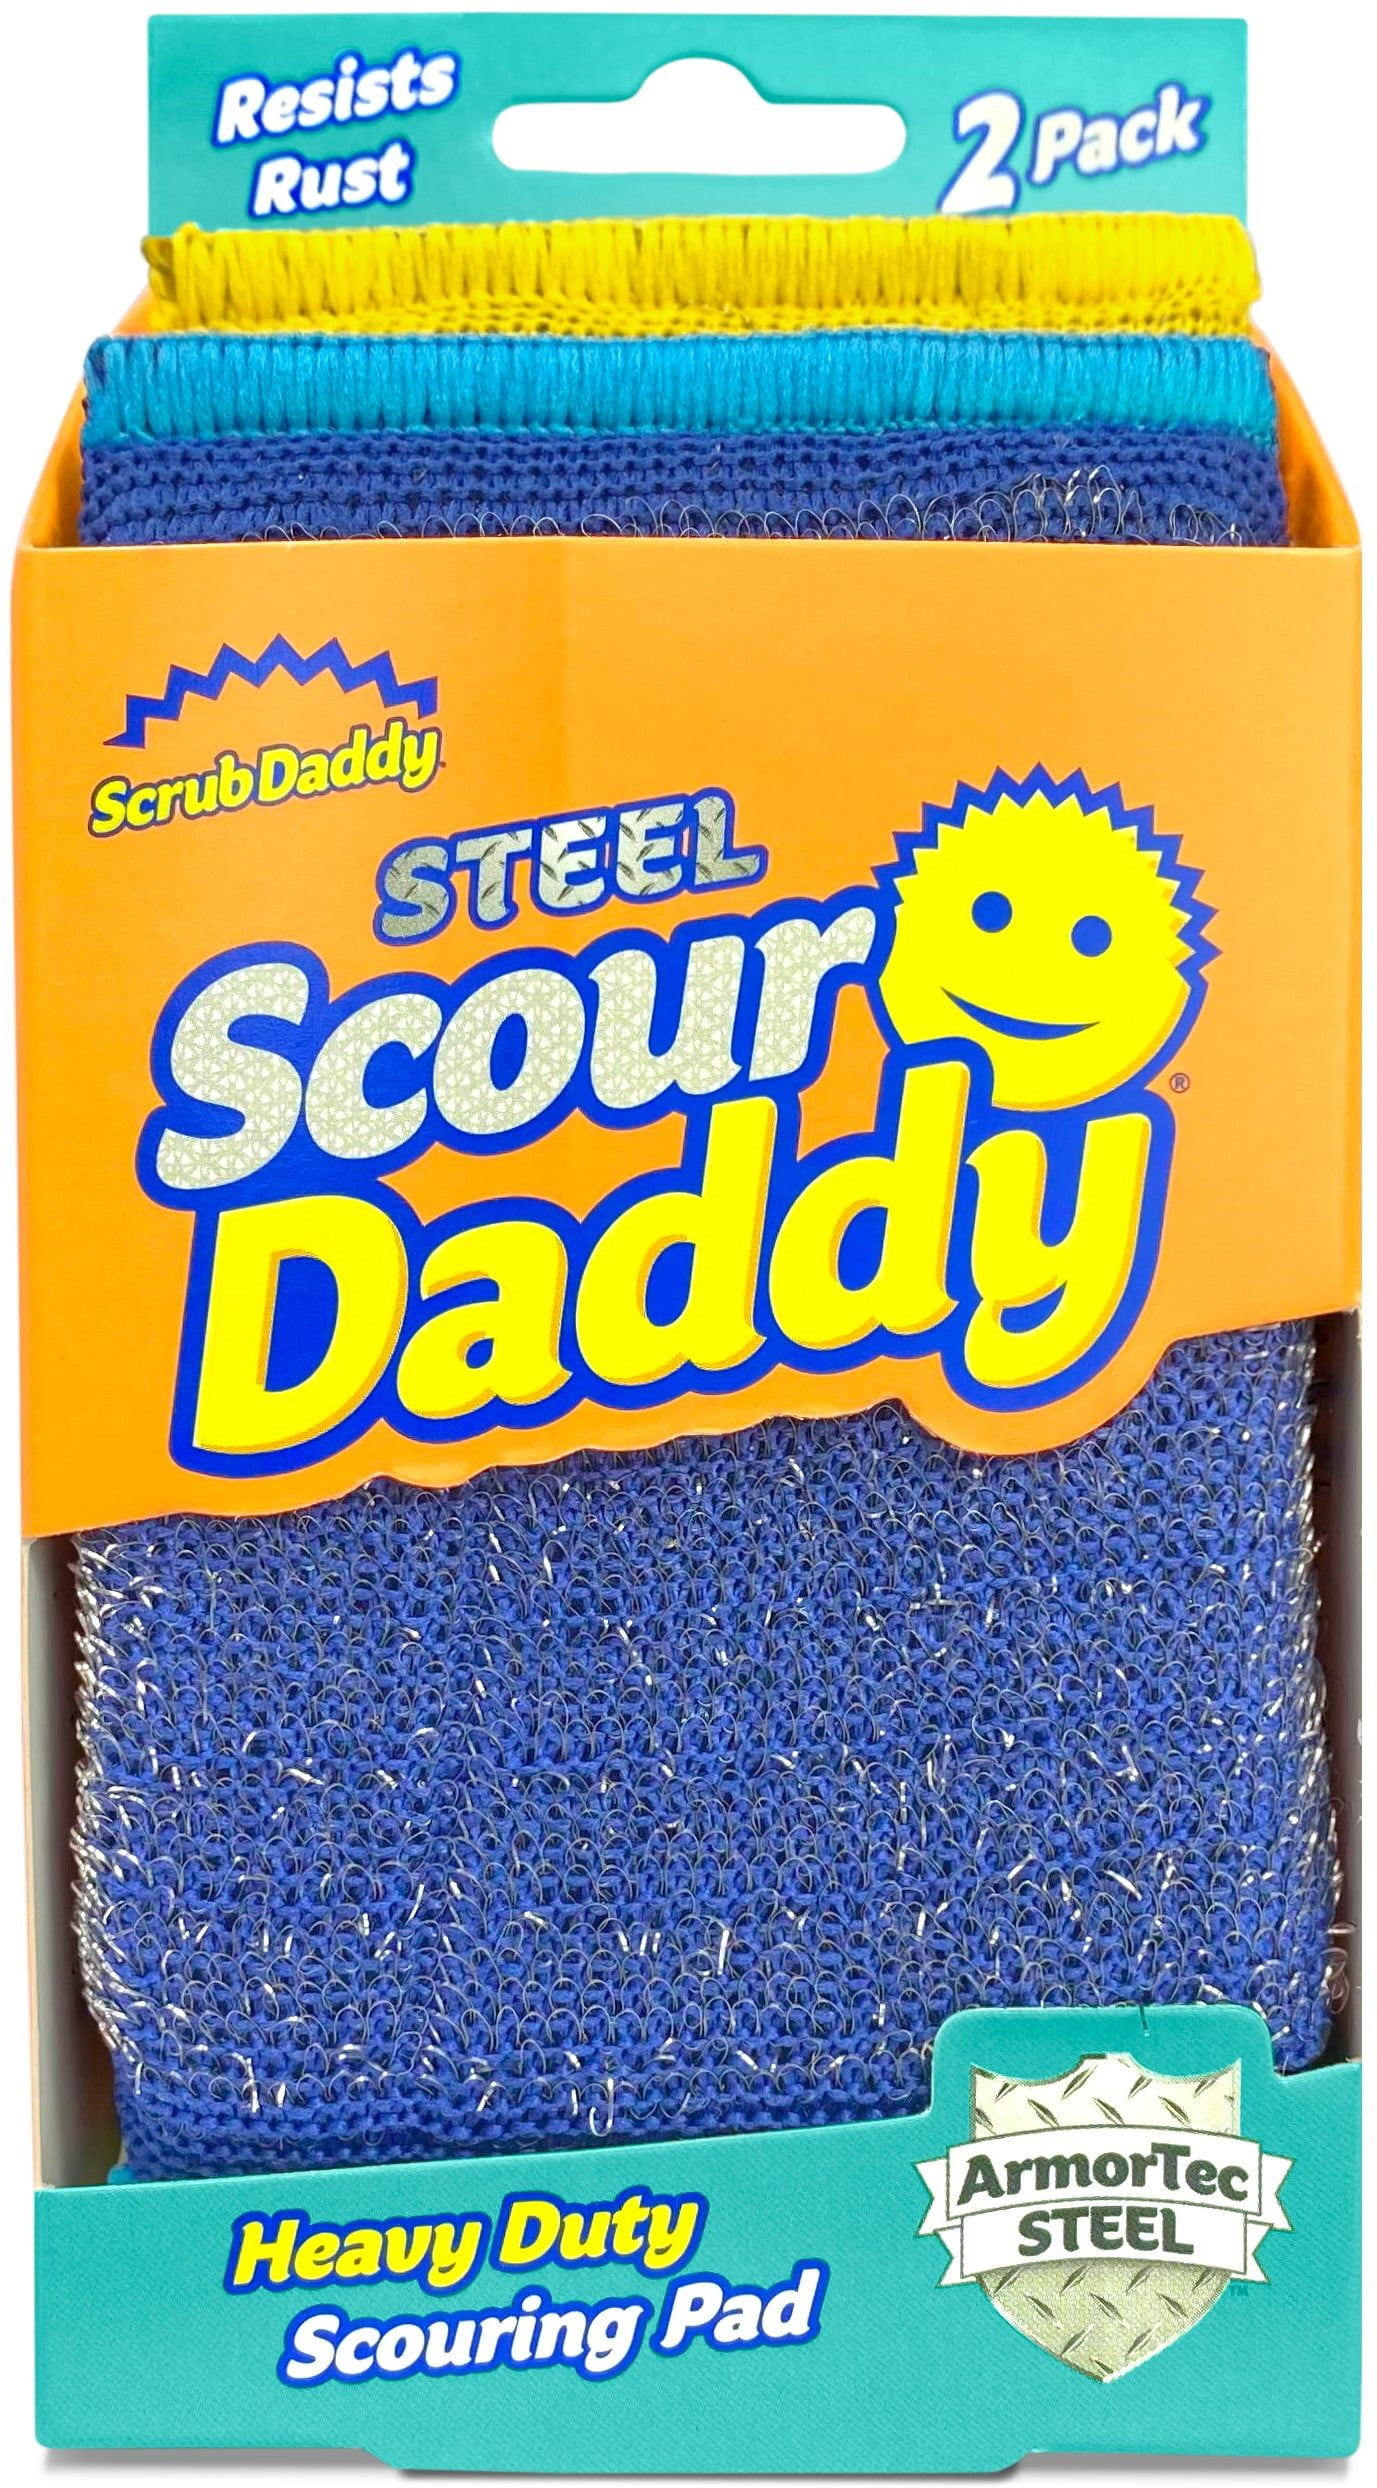 Scrub Daddy Sponge Daddy Cellulose Sponge with Scouring Pad (3-Pack) in the  Sponges & Scouring Pads department at